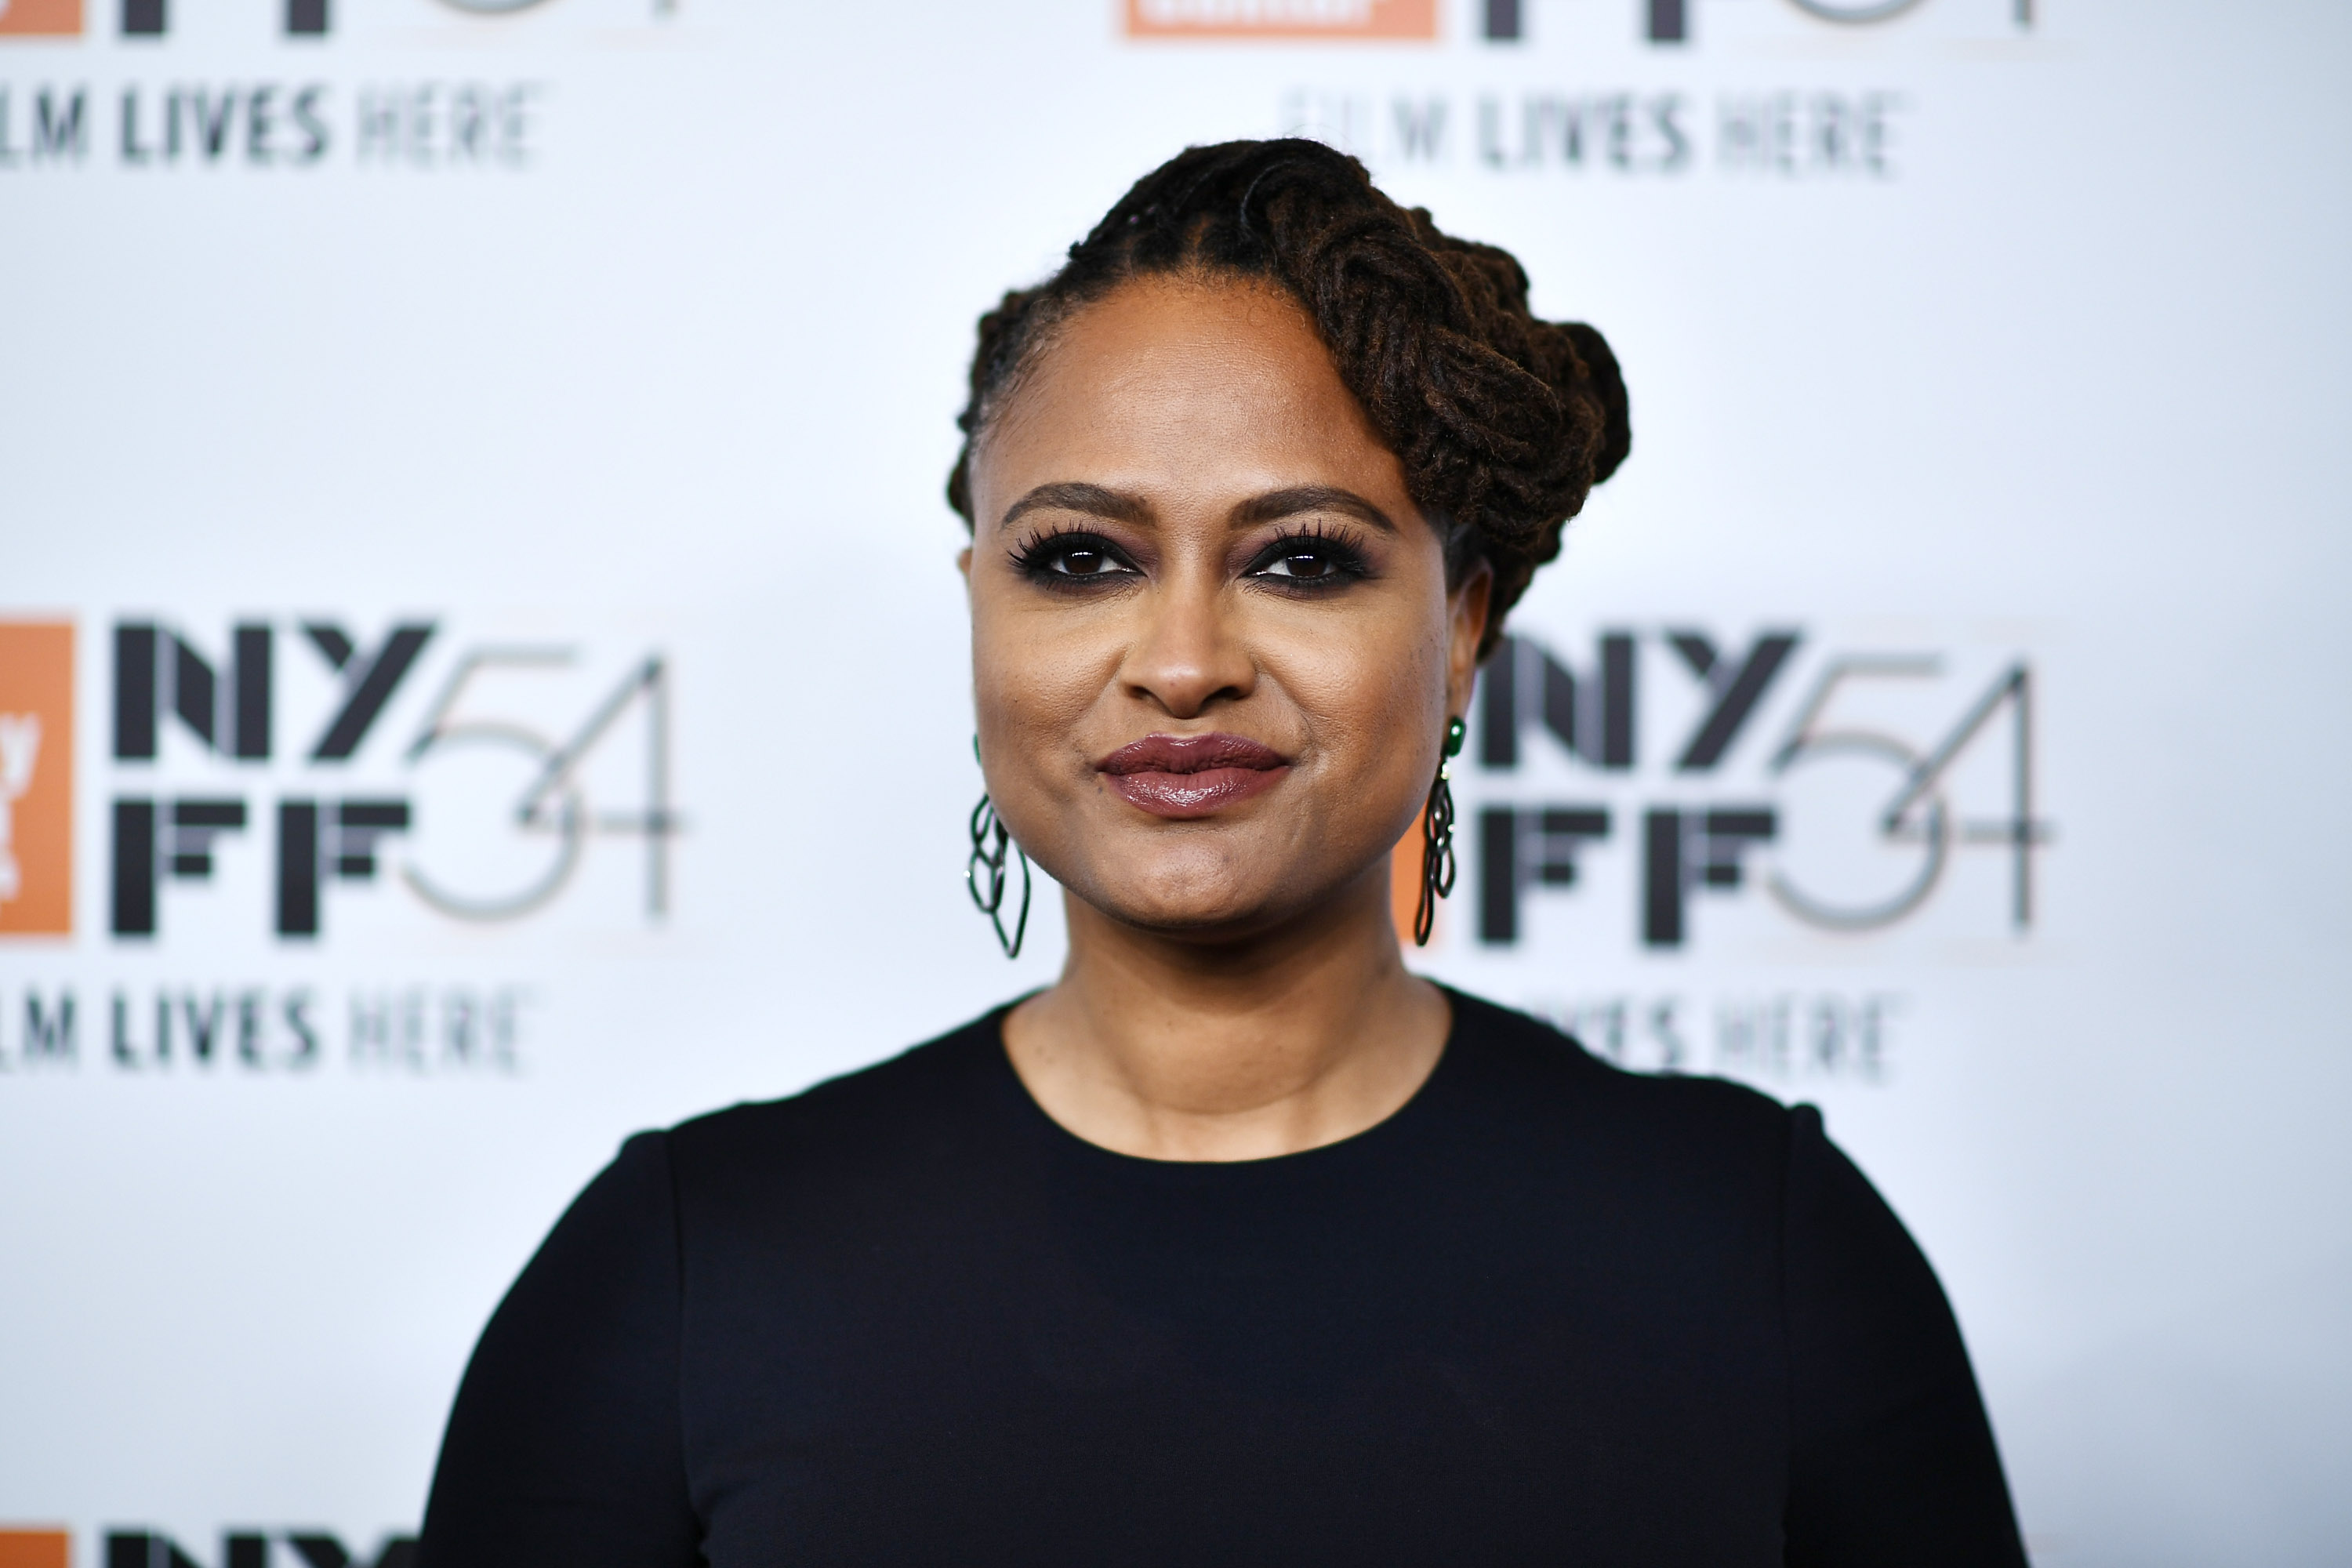 Director Ava DuVernay attends the 54th New York Film Festival  opening night gala presentation and "13th" world premiere at Alice Tully Hall at Lincoln Center on September 30, 2016 in New York City. (Dimitrios Kambouris—WireImage/Getty Images)